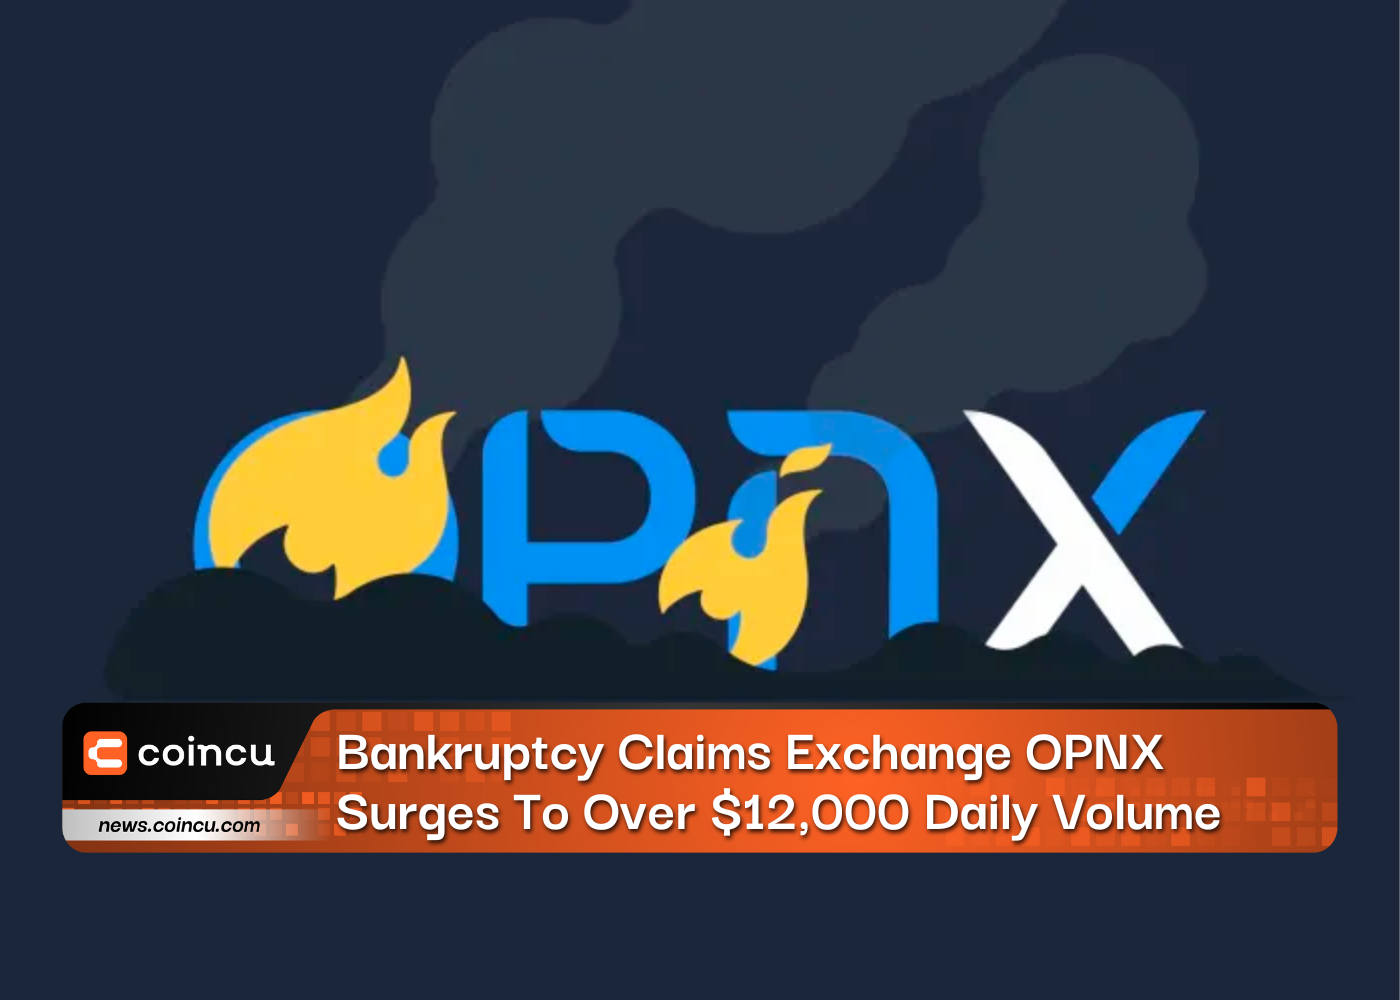 Bankruptcy Claims Exchange OPNX Surges To Over $12,000 Daily Volume